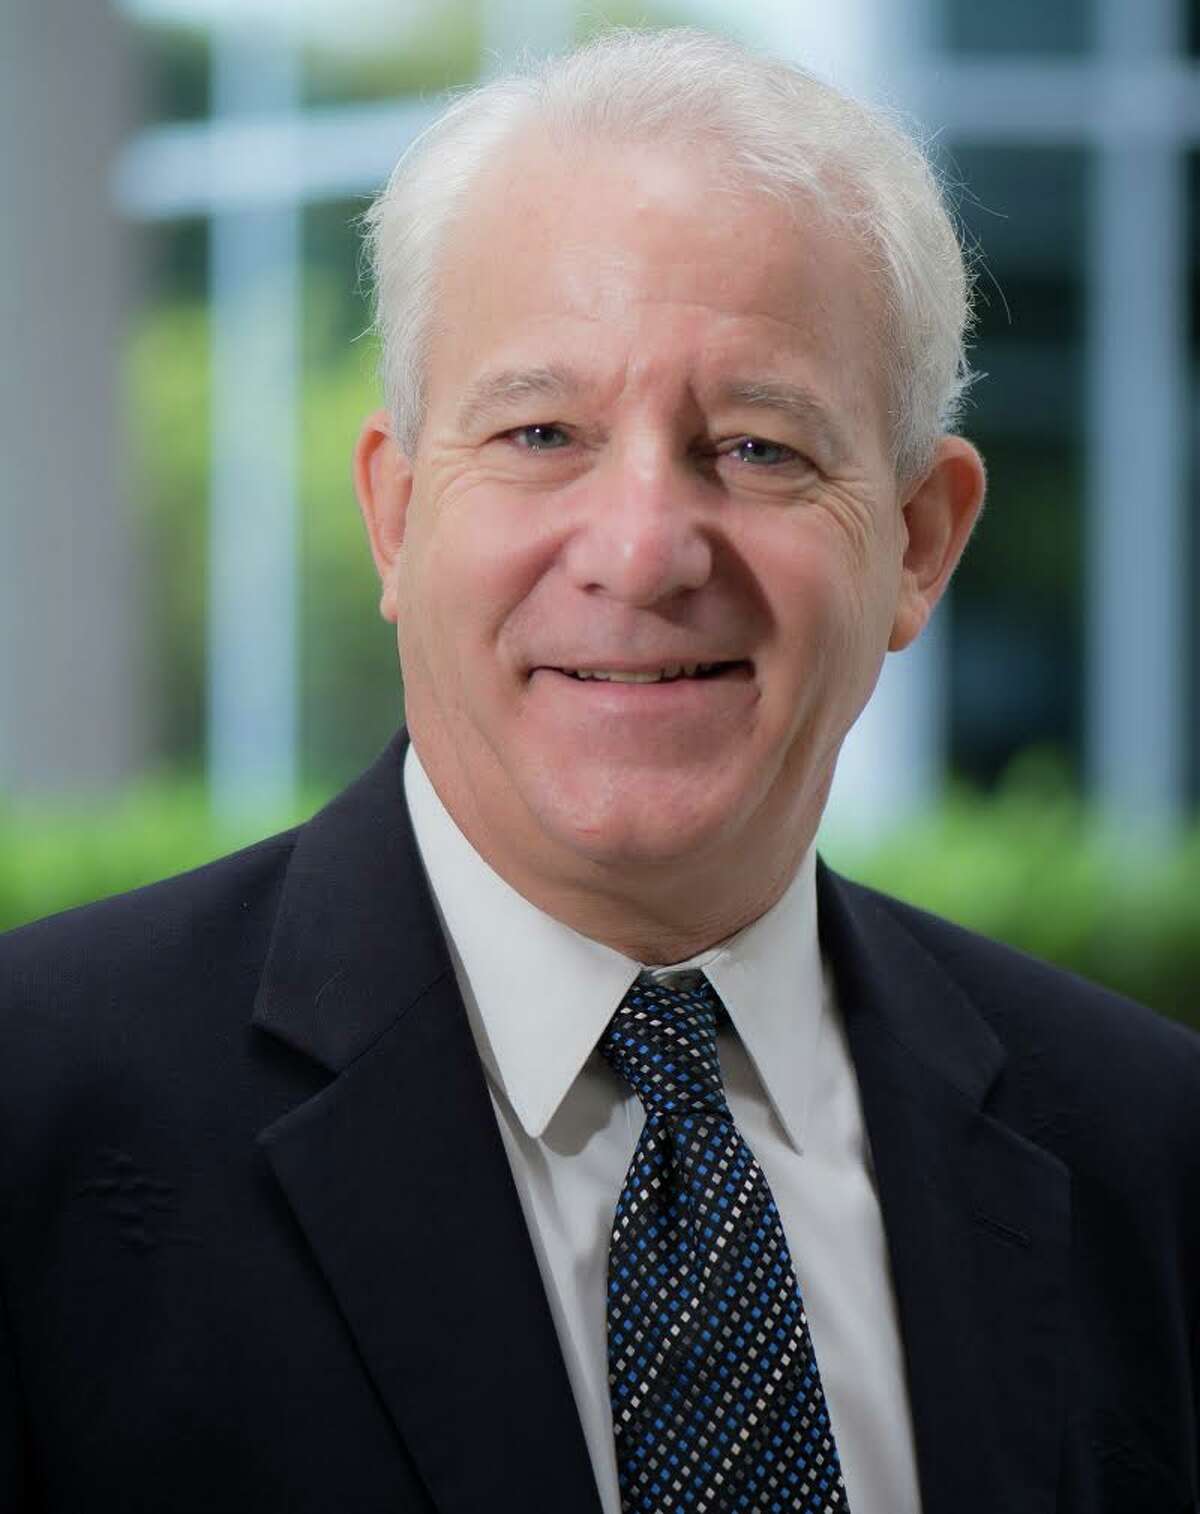 William "Bill" Fulton has been named director of Rice University's Kinder Institute for Urban Research.